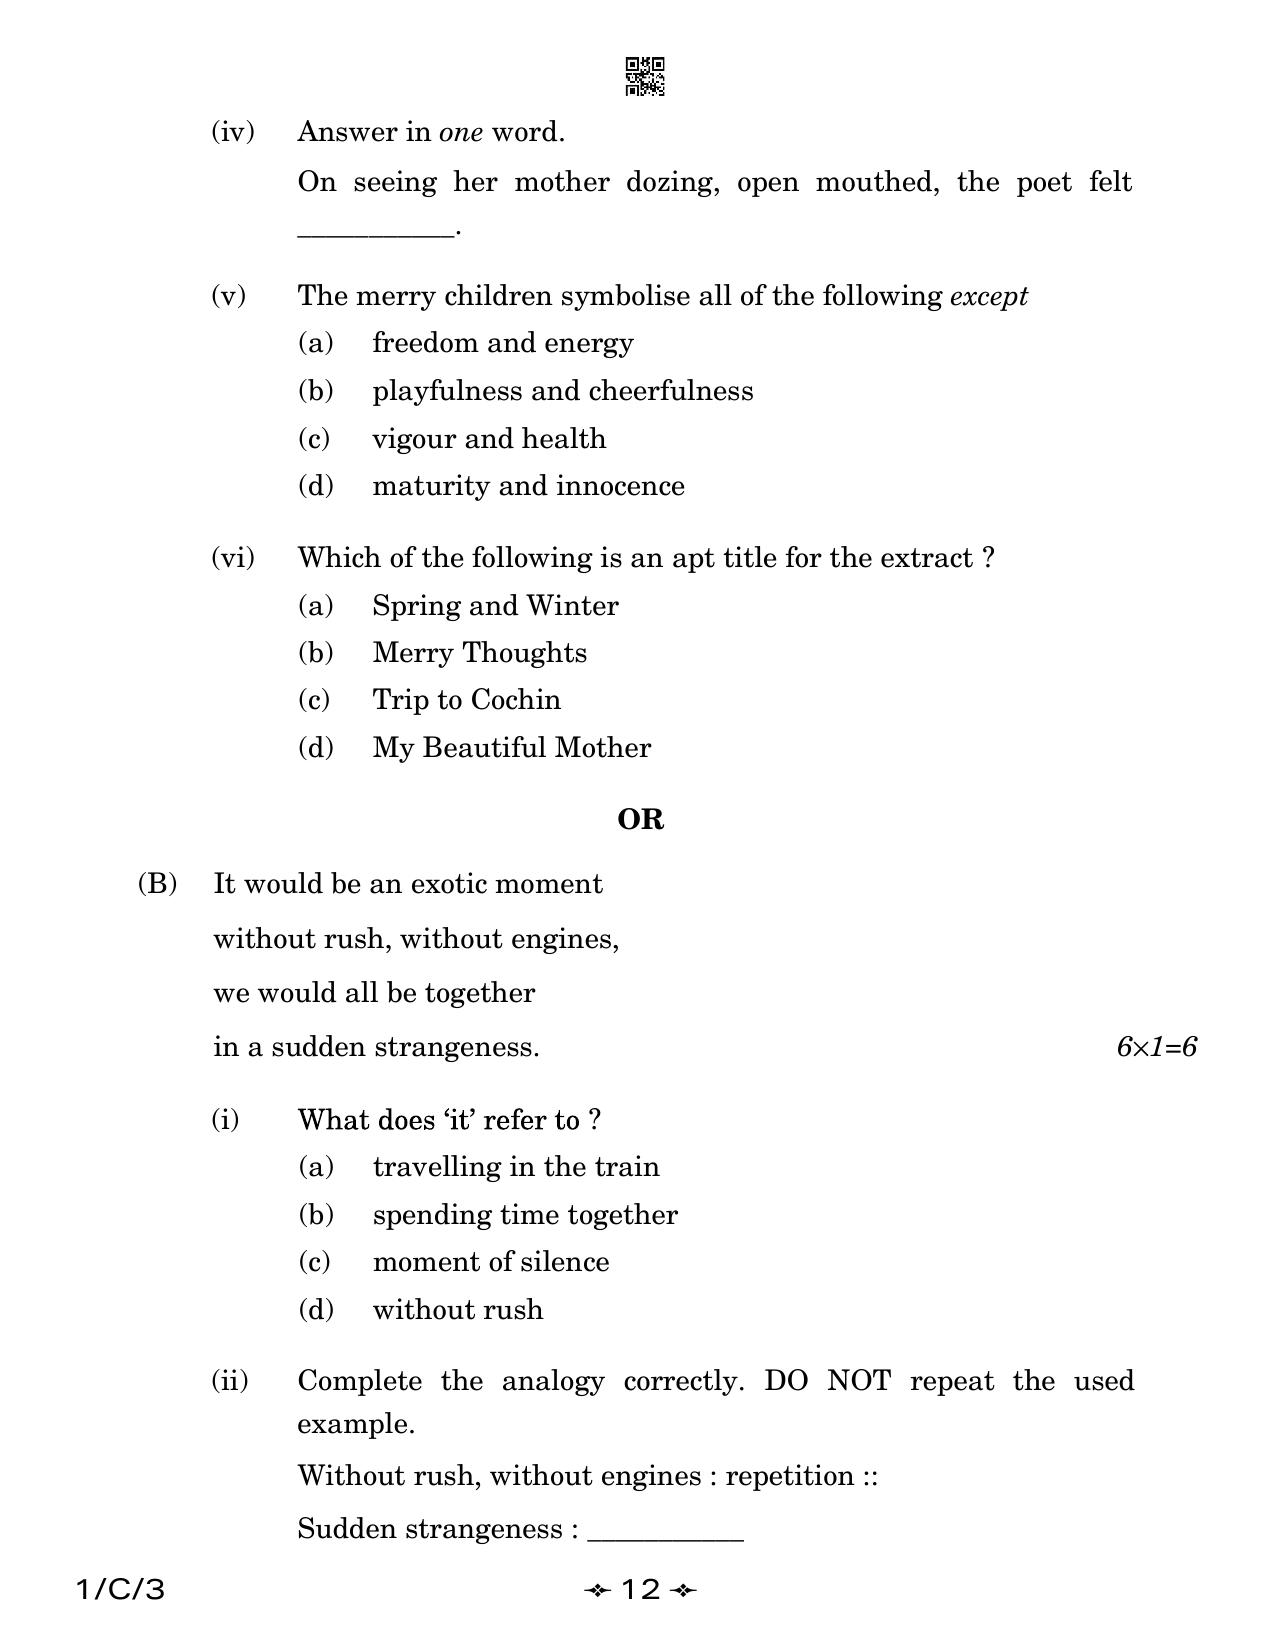 CBSE Class 12 1-3 English Core 2023 (Compartment) Question Paper - Page 12